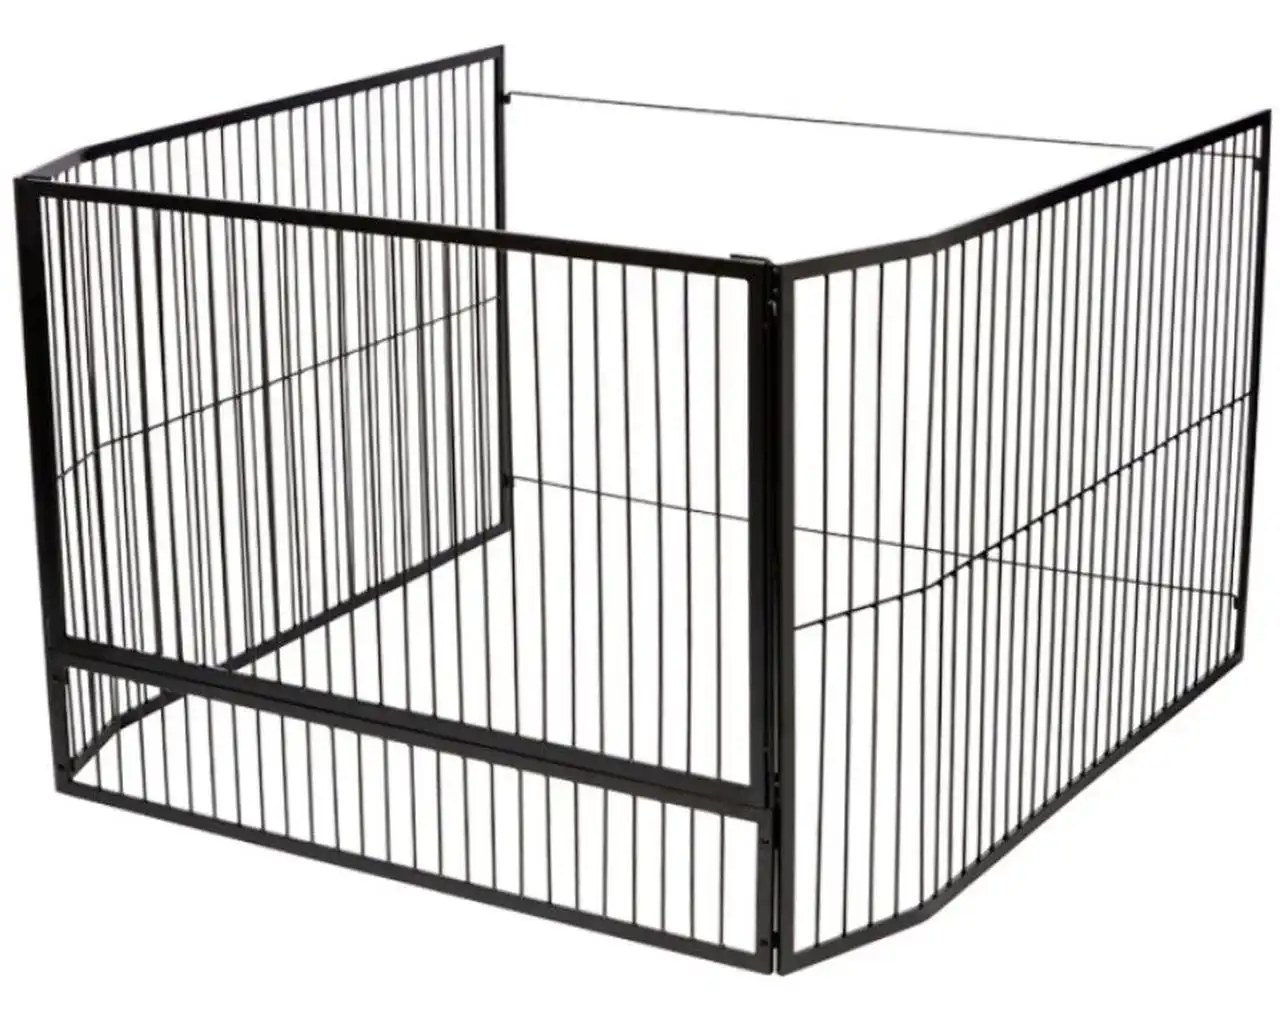 Maxiheat Large Freestanding Child Guard with Gate